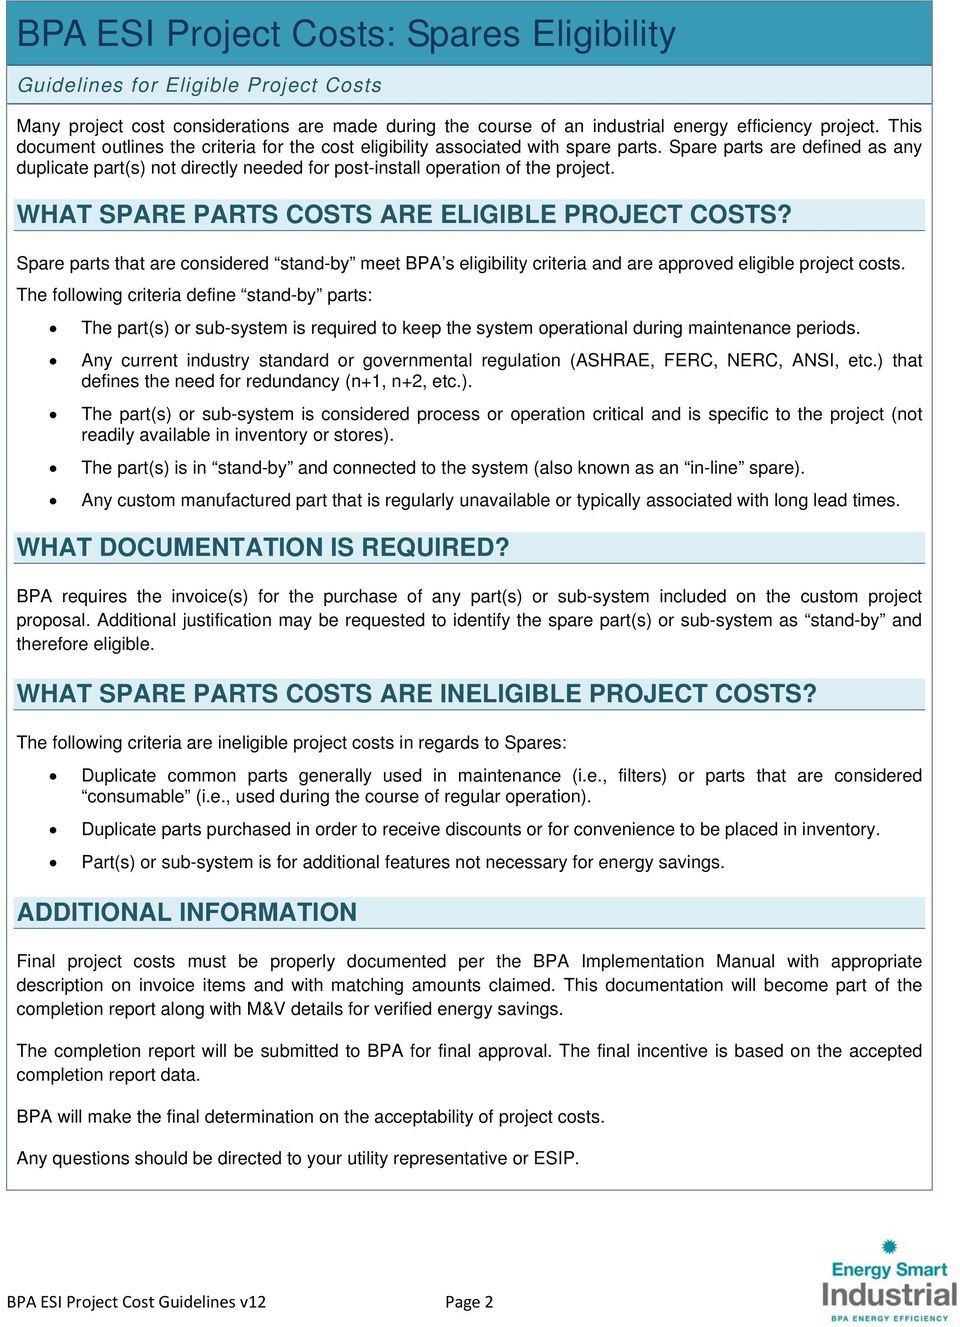 Spare parts are defined as any duplicate part(s) not directly needed for post-install operation of the project. WHAT SPARE PARTS COSTS ARE ELIGIBLE PROJECT COSTS?